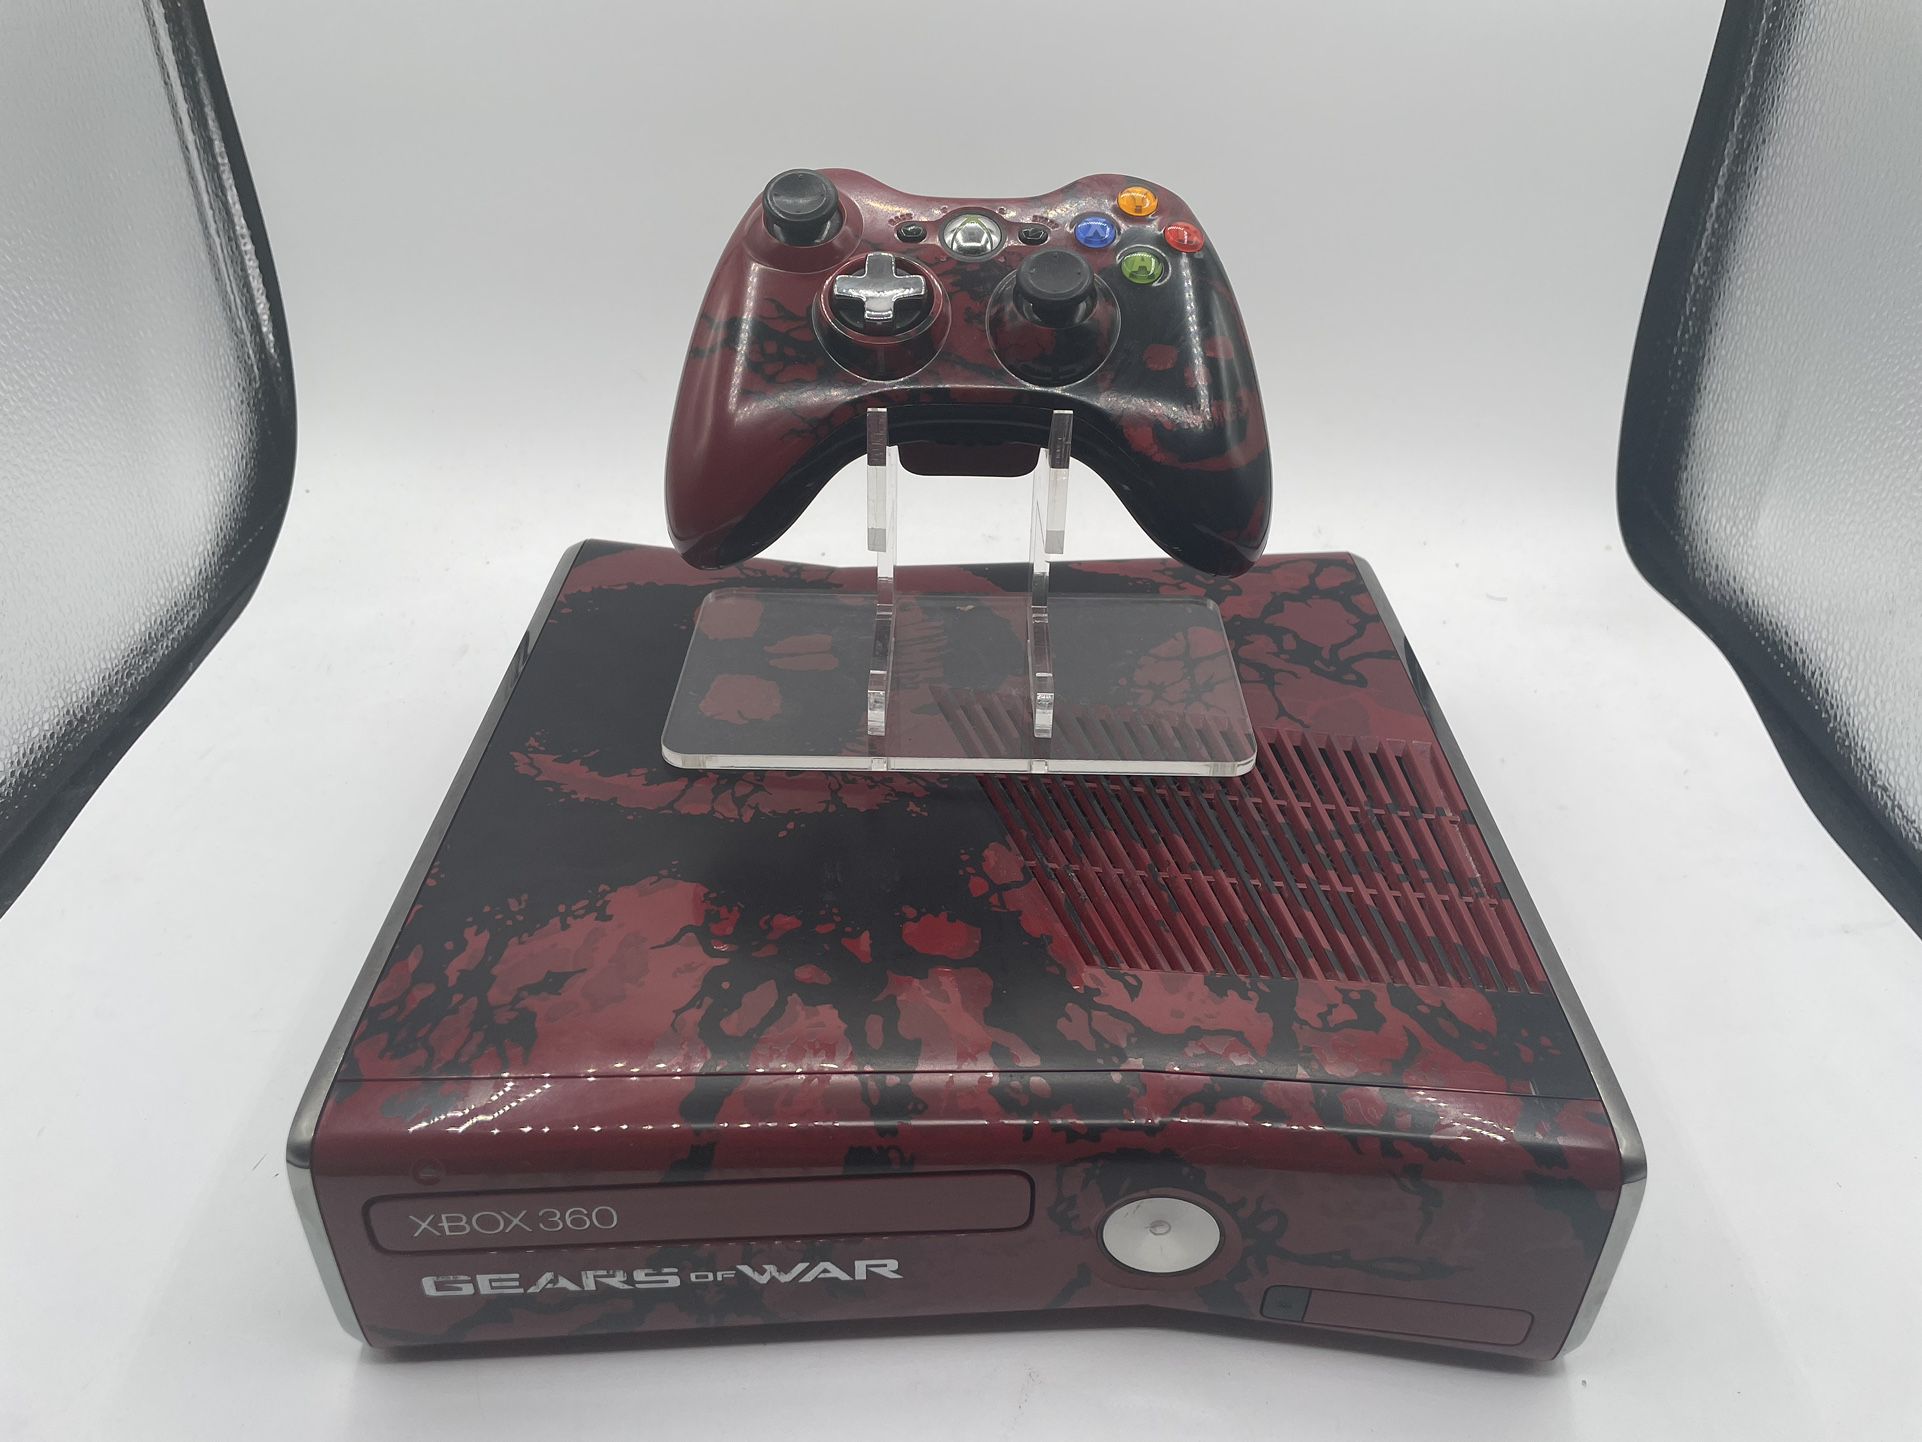 Restored Microsoft Xbox 360 500GB With Gears Of War 3 And Call Of